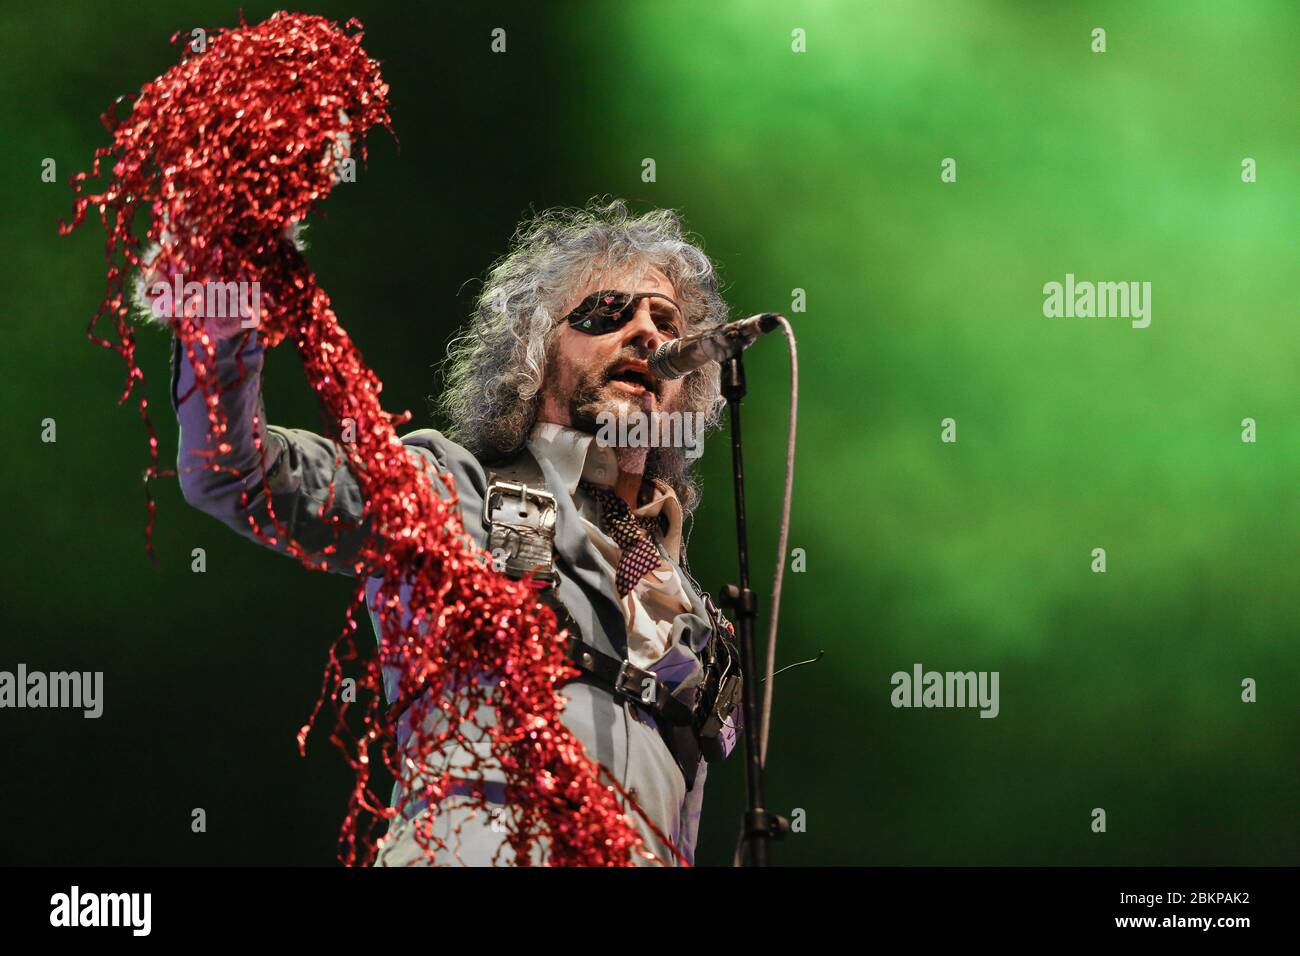 Singer Wayne Coyne of the Flaming Lips, as the band performs at the 2018 Bluedot Festival held at Jodrell Bank in Cheshire, UK. Stock Photo